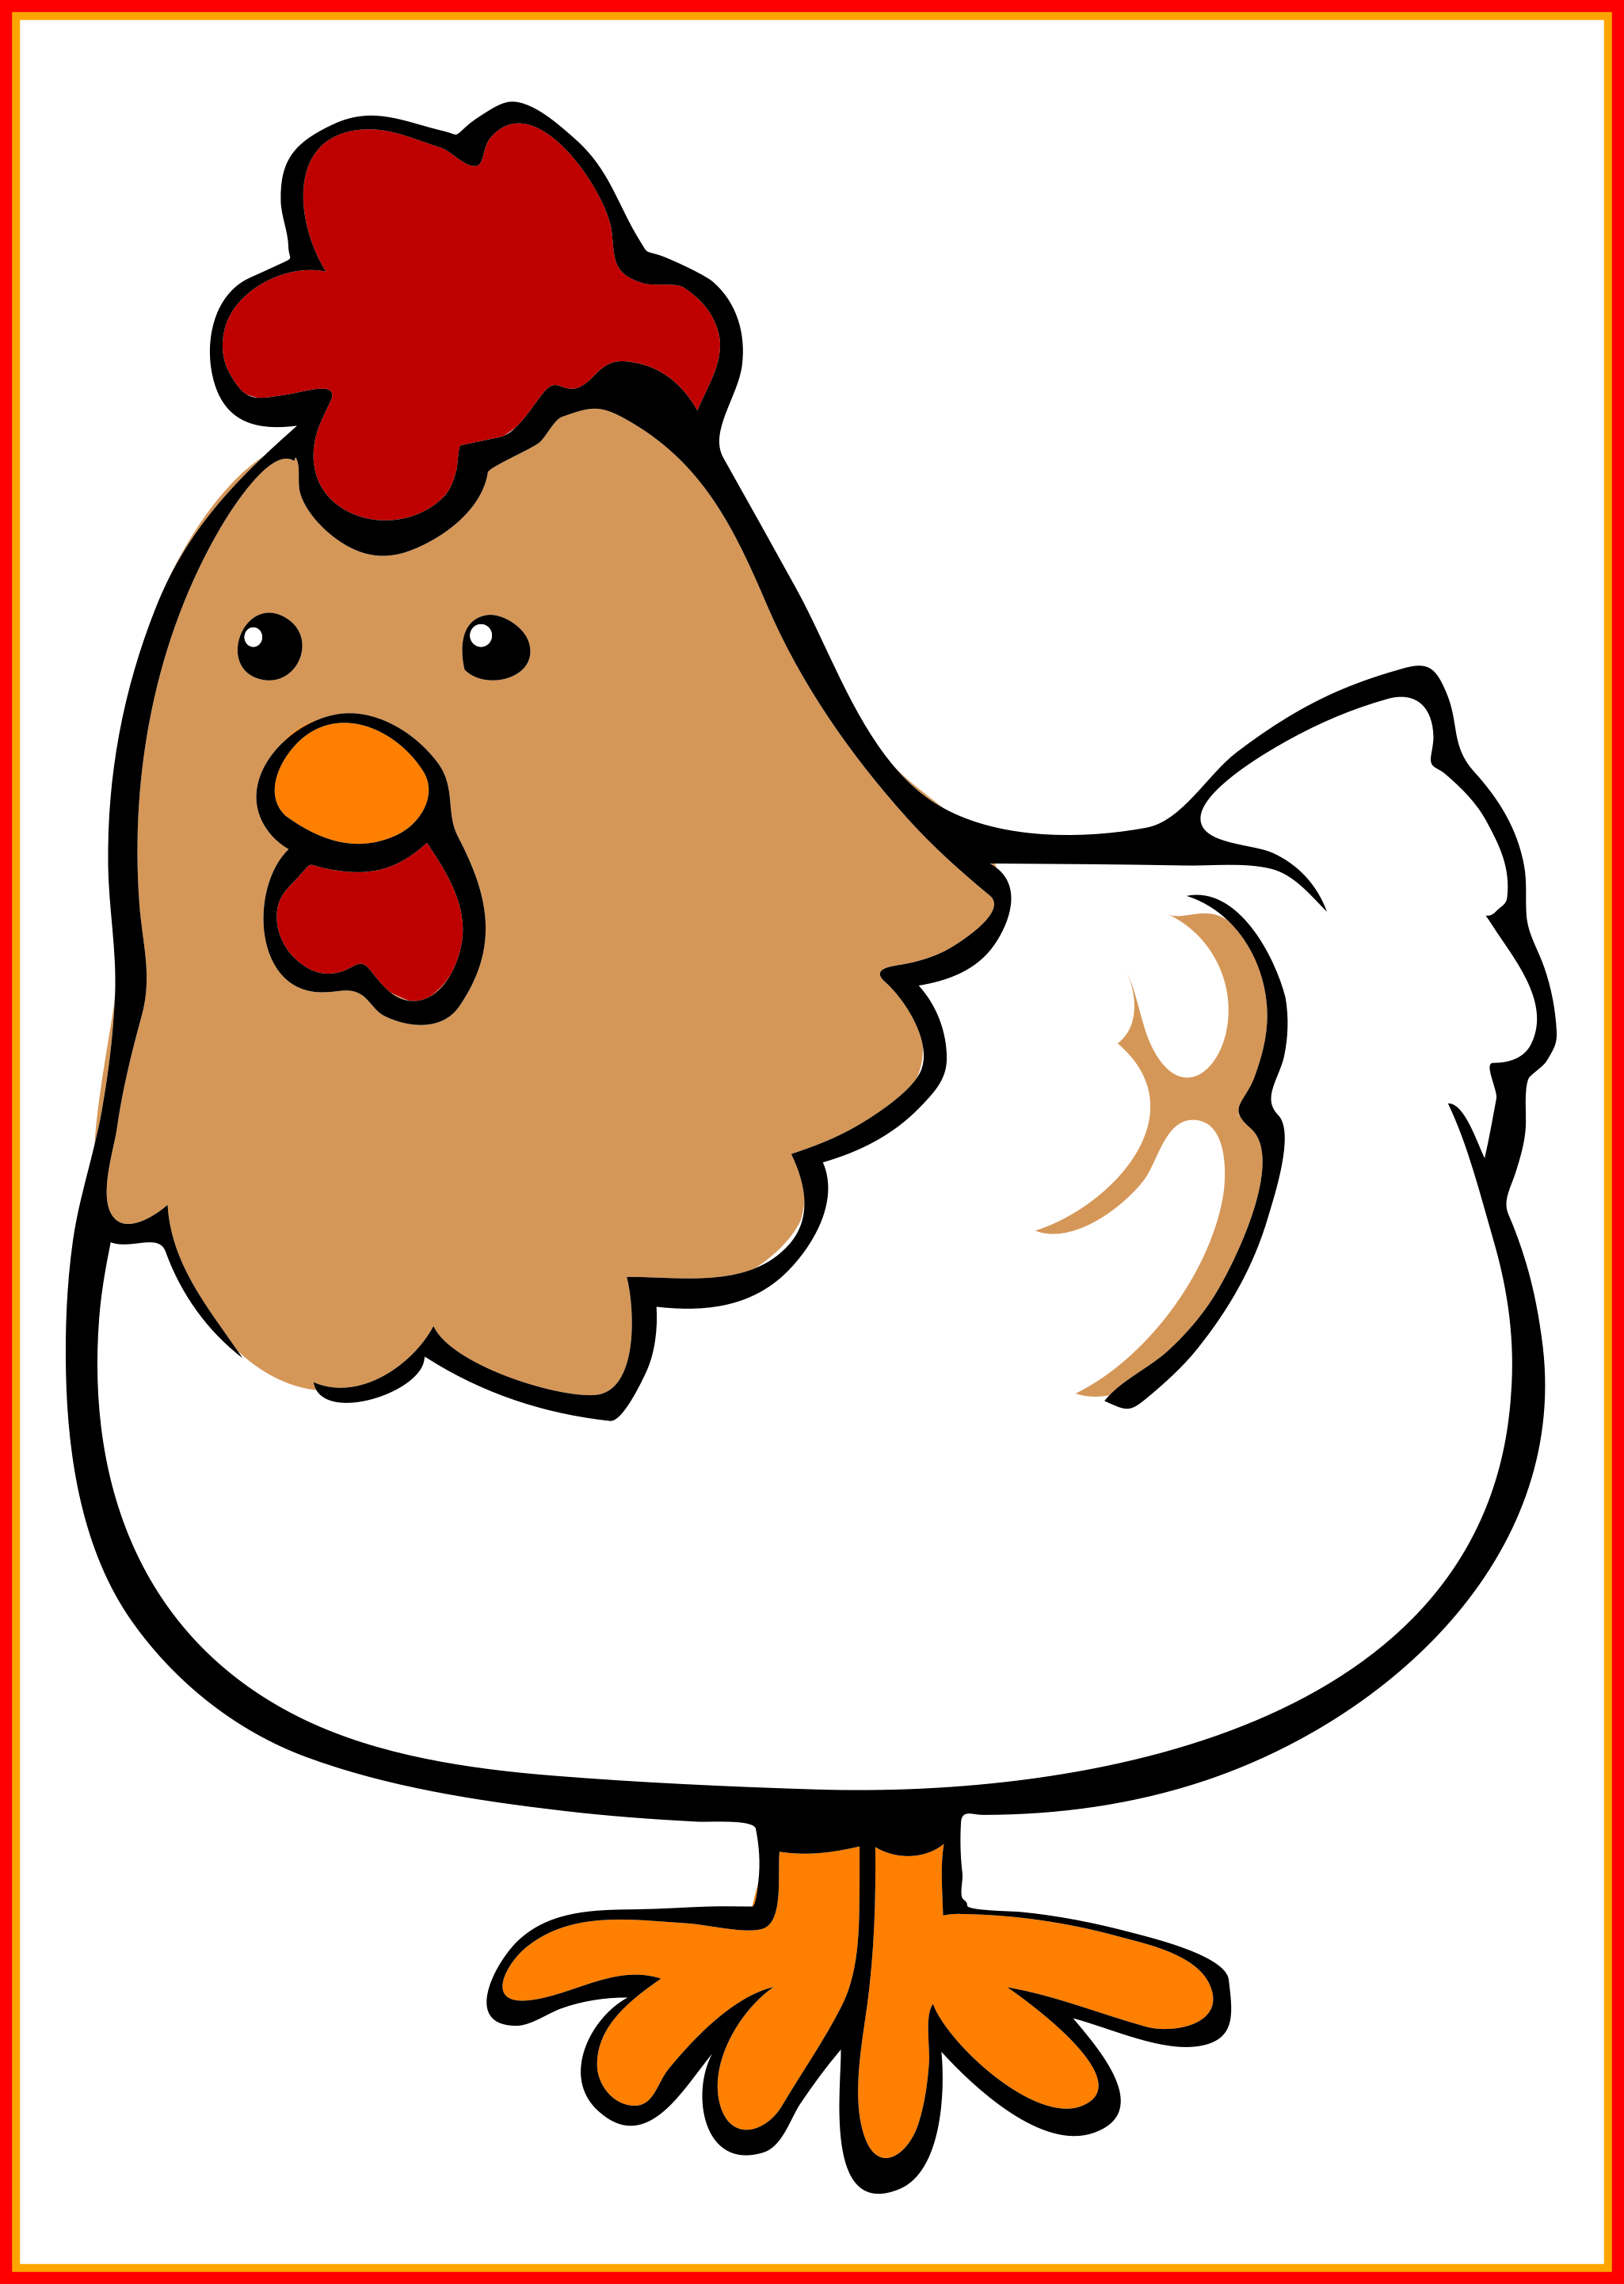 Marvelous Make It Different Colors Put In Smash Book - Chicken Cartoon Transparent Background (2050x2883)